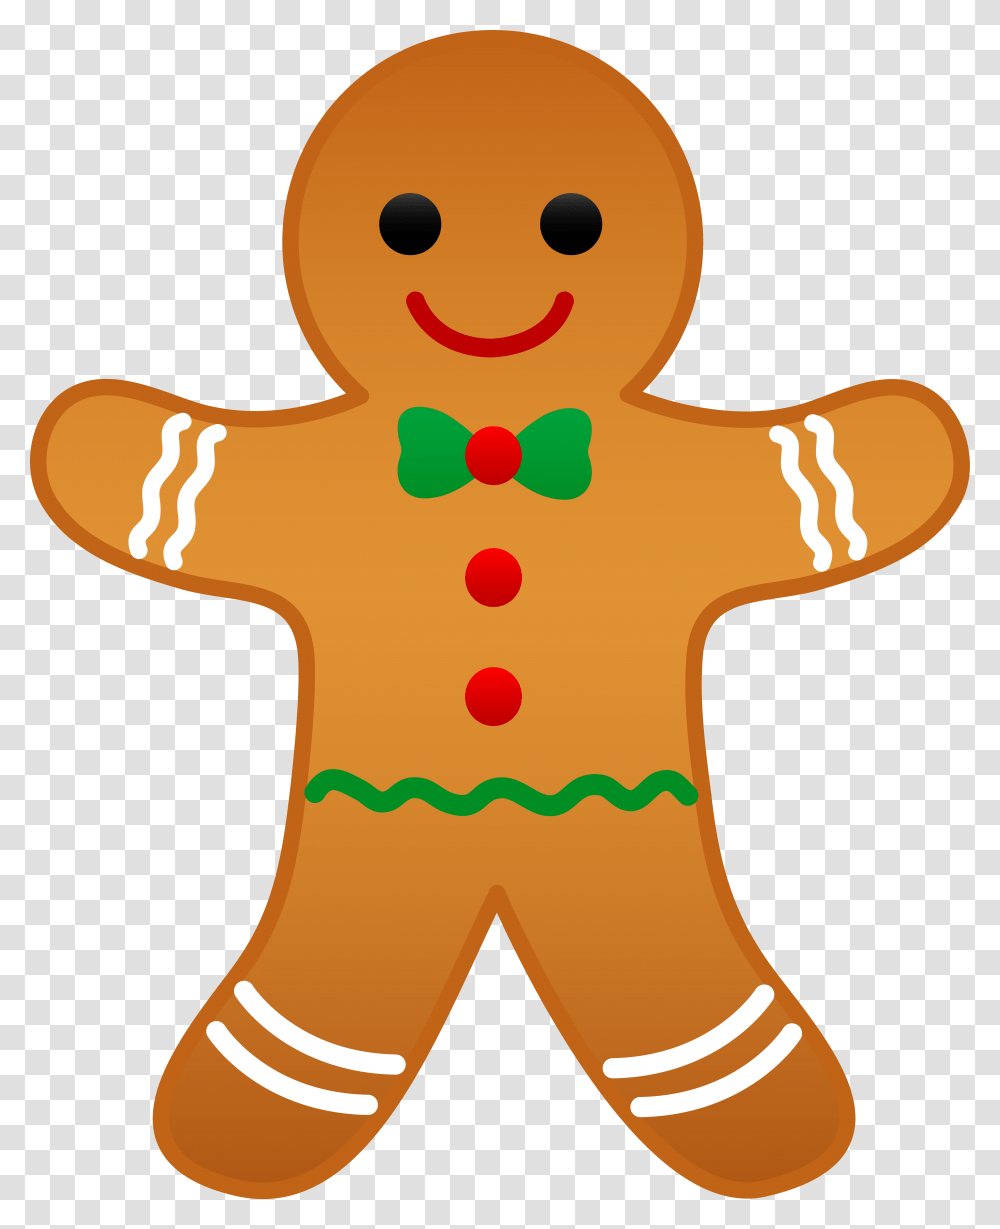 Clipart Background Ginger Bread Gingerbread Man Christmas Gingerbread Man Clipart, Food, Cookie, Biscuit, Toast Transparent Png